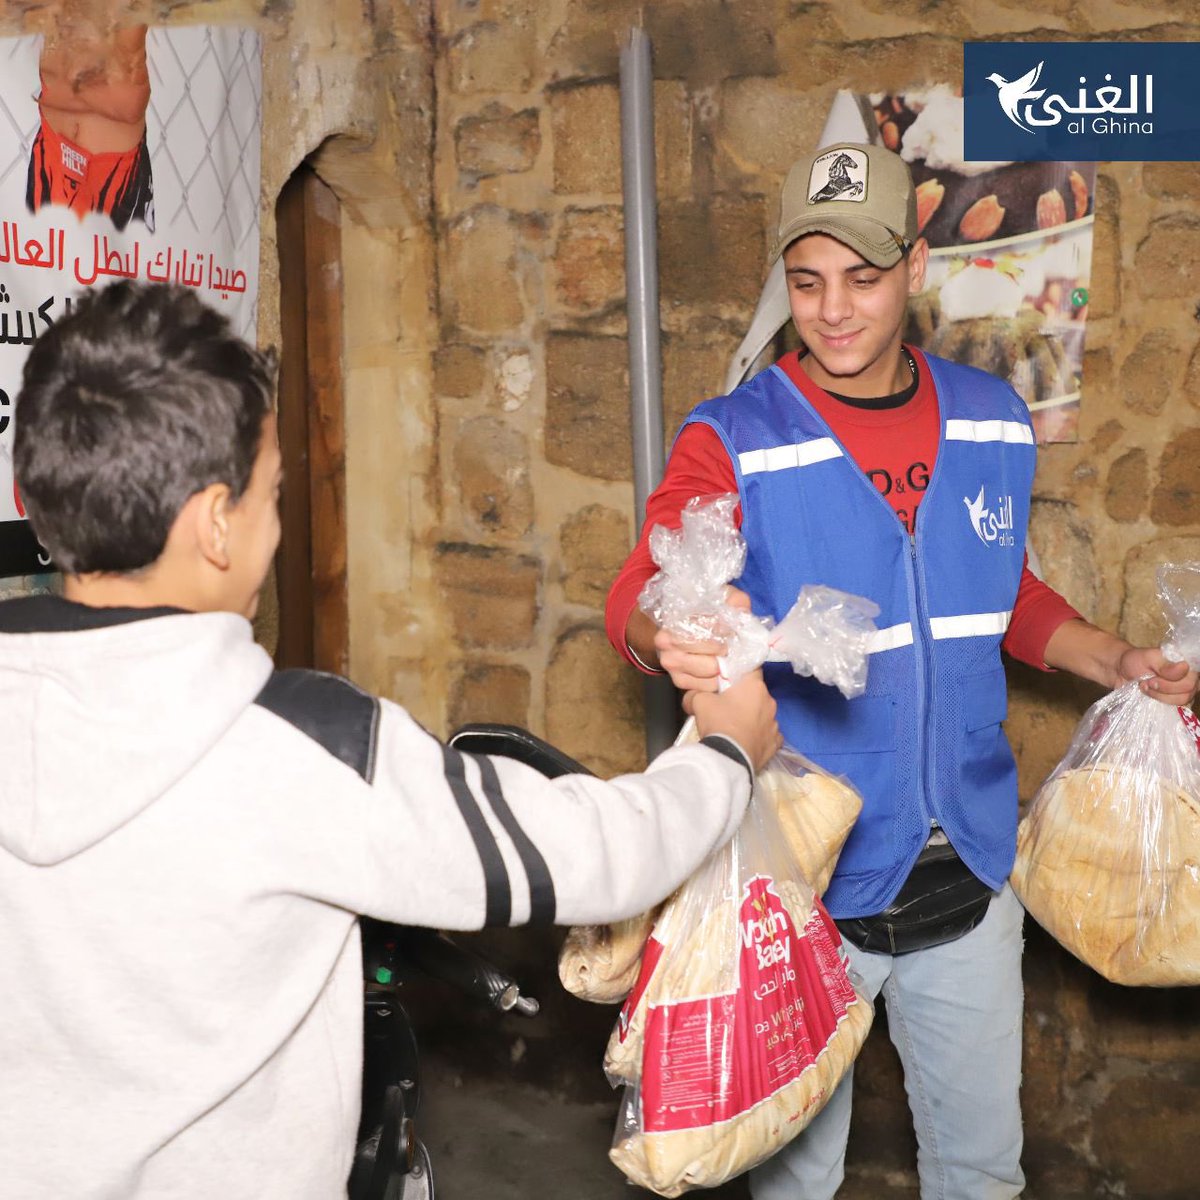 Nourishing Hope: Extending a Helping Hand to Lebanon's Needy through Bread Distribution
#CharityMatters #GivingBack #MakingADifference #GiveHope #CharityWorks #ChangeLives #SpreadKindness #SupportingCauses #EmpoweringCommunities #PhilanthropyMatters #BeTheChange #InspireHope